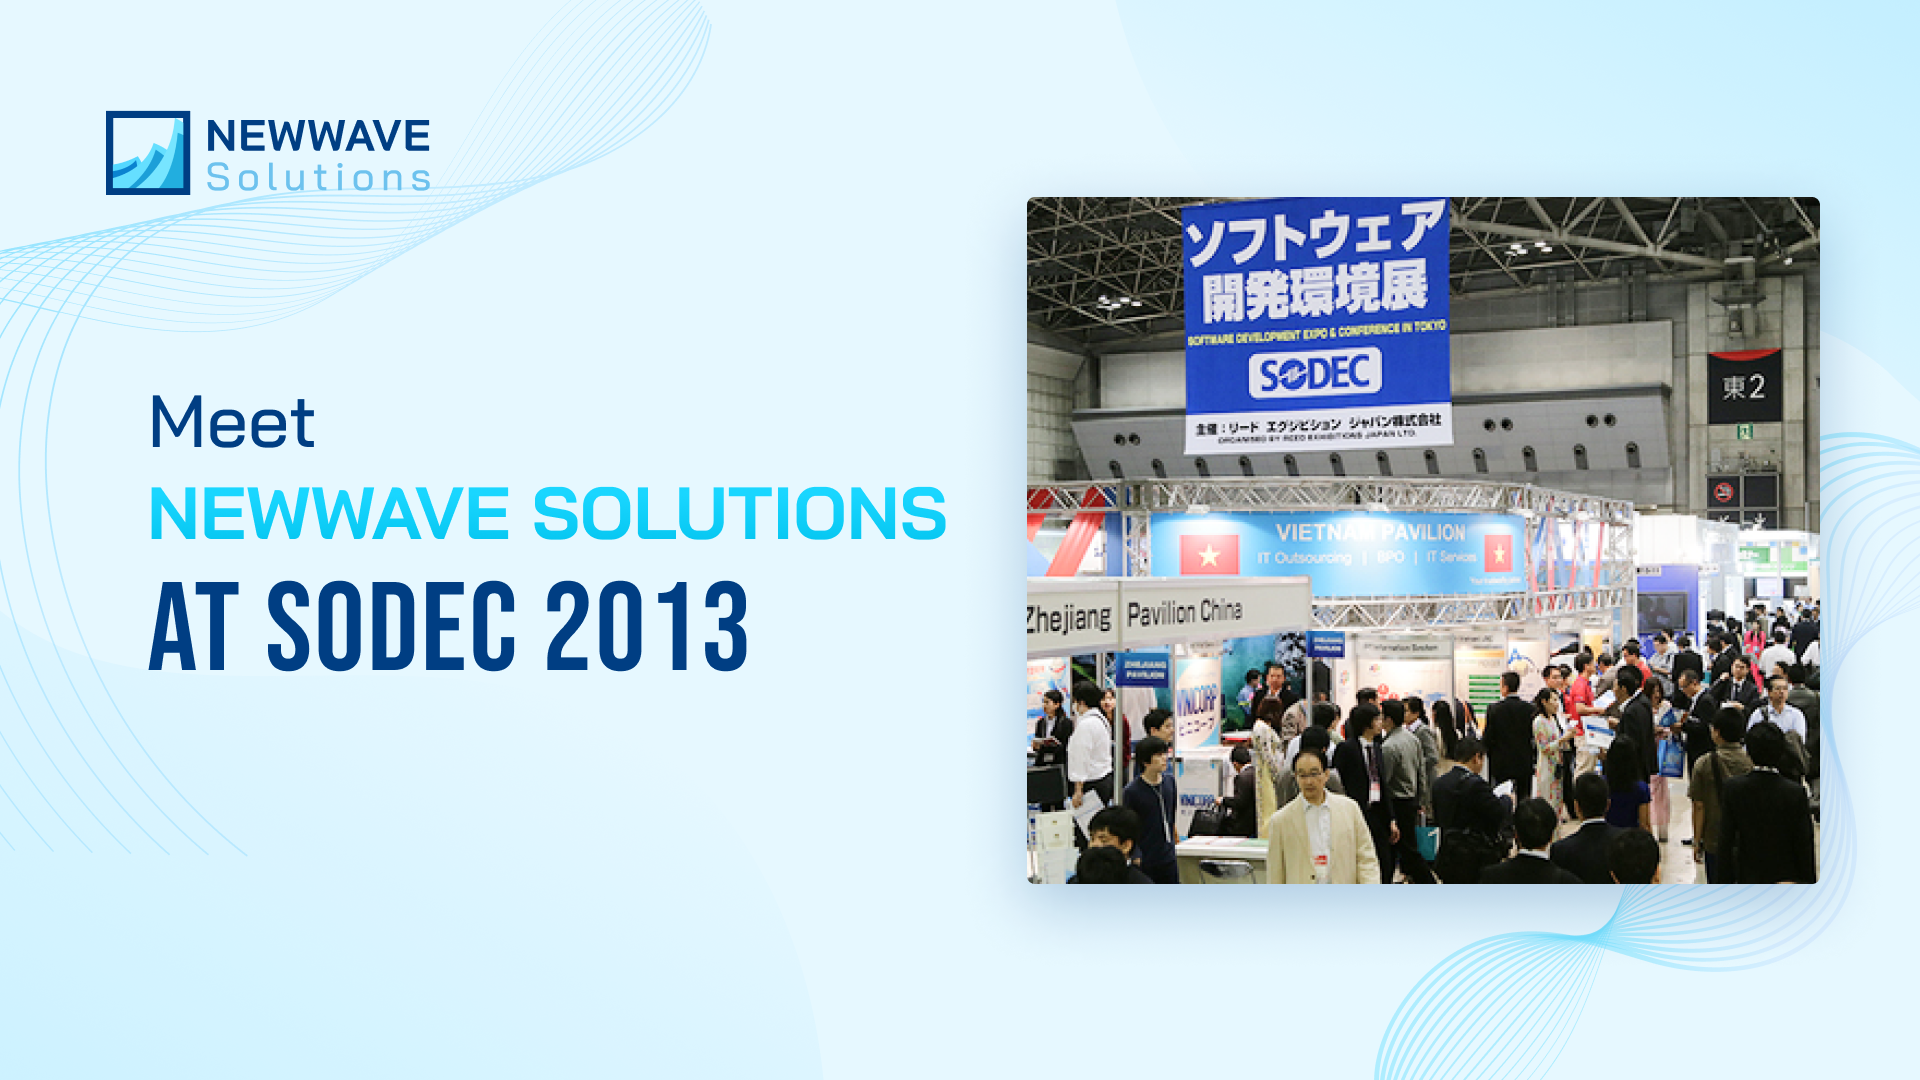 Meet Newwave Solutions at SODEC 2013